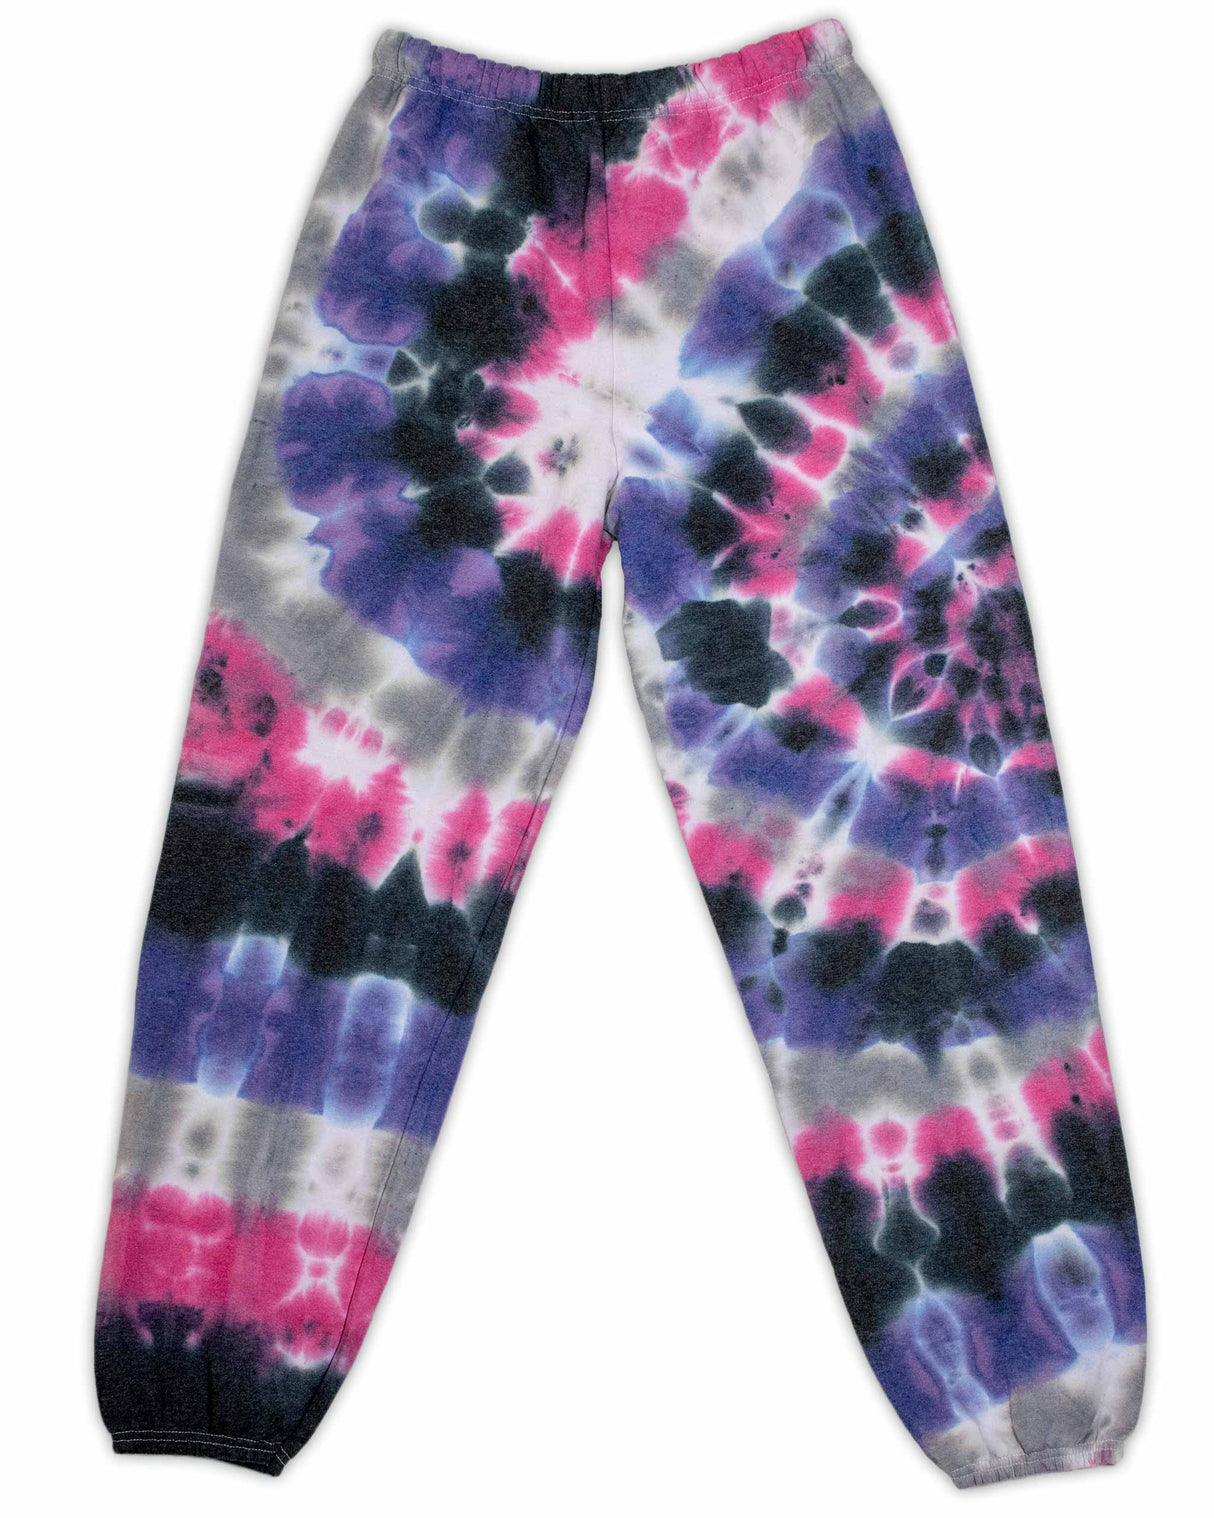 These soft sweatpants exhibit a tie-dye design with splashes of magenta and lavender, contrasted by patches of inky black.